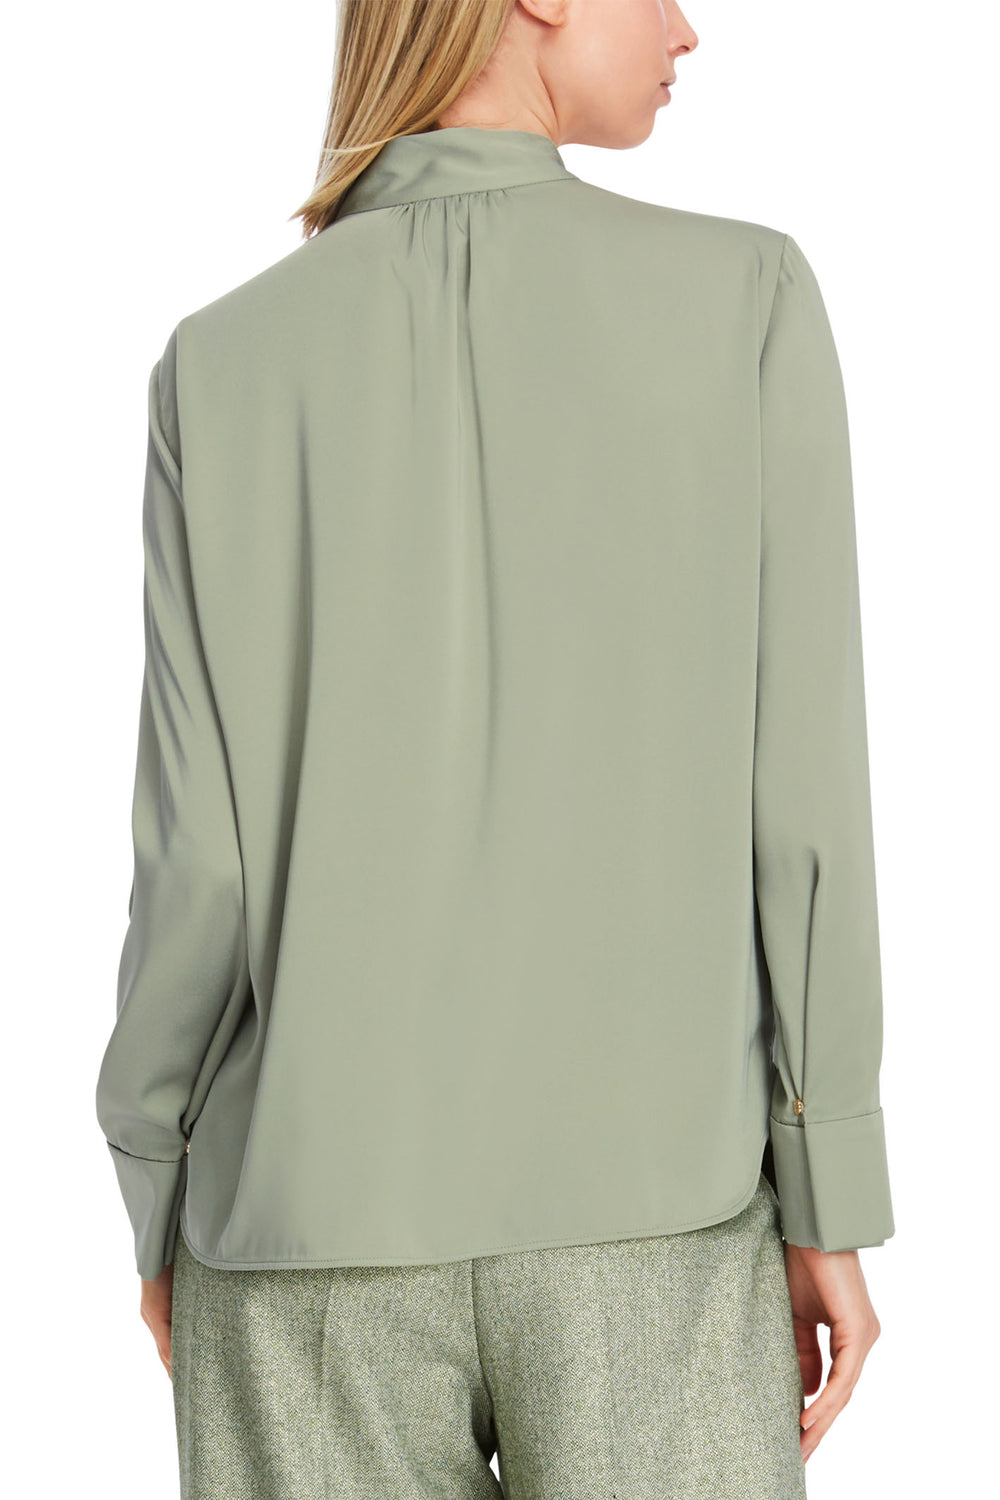 Marc Cain Collection XC 51.22 W08 Frozen Sage Green Blouse - Olivia Grace Fashion